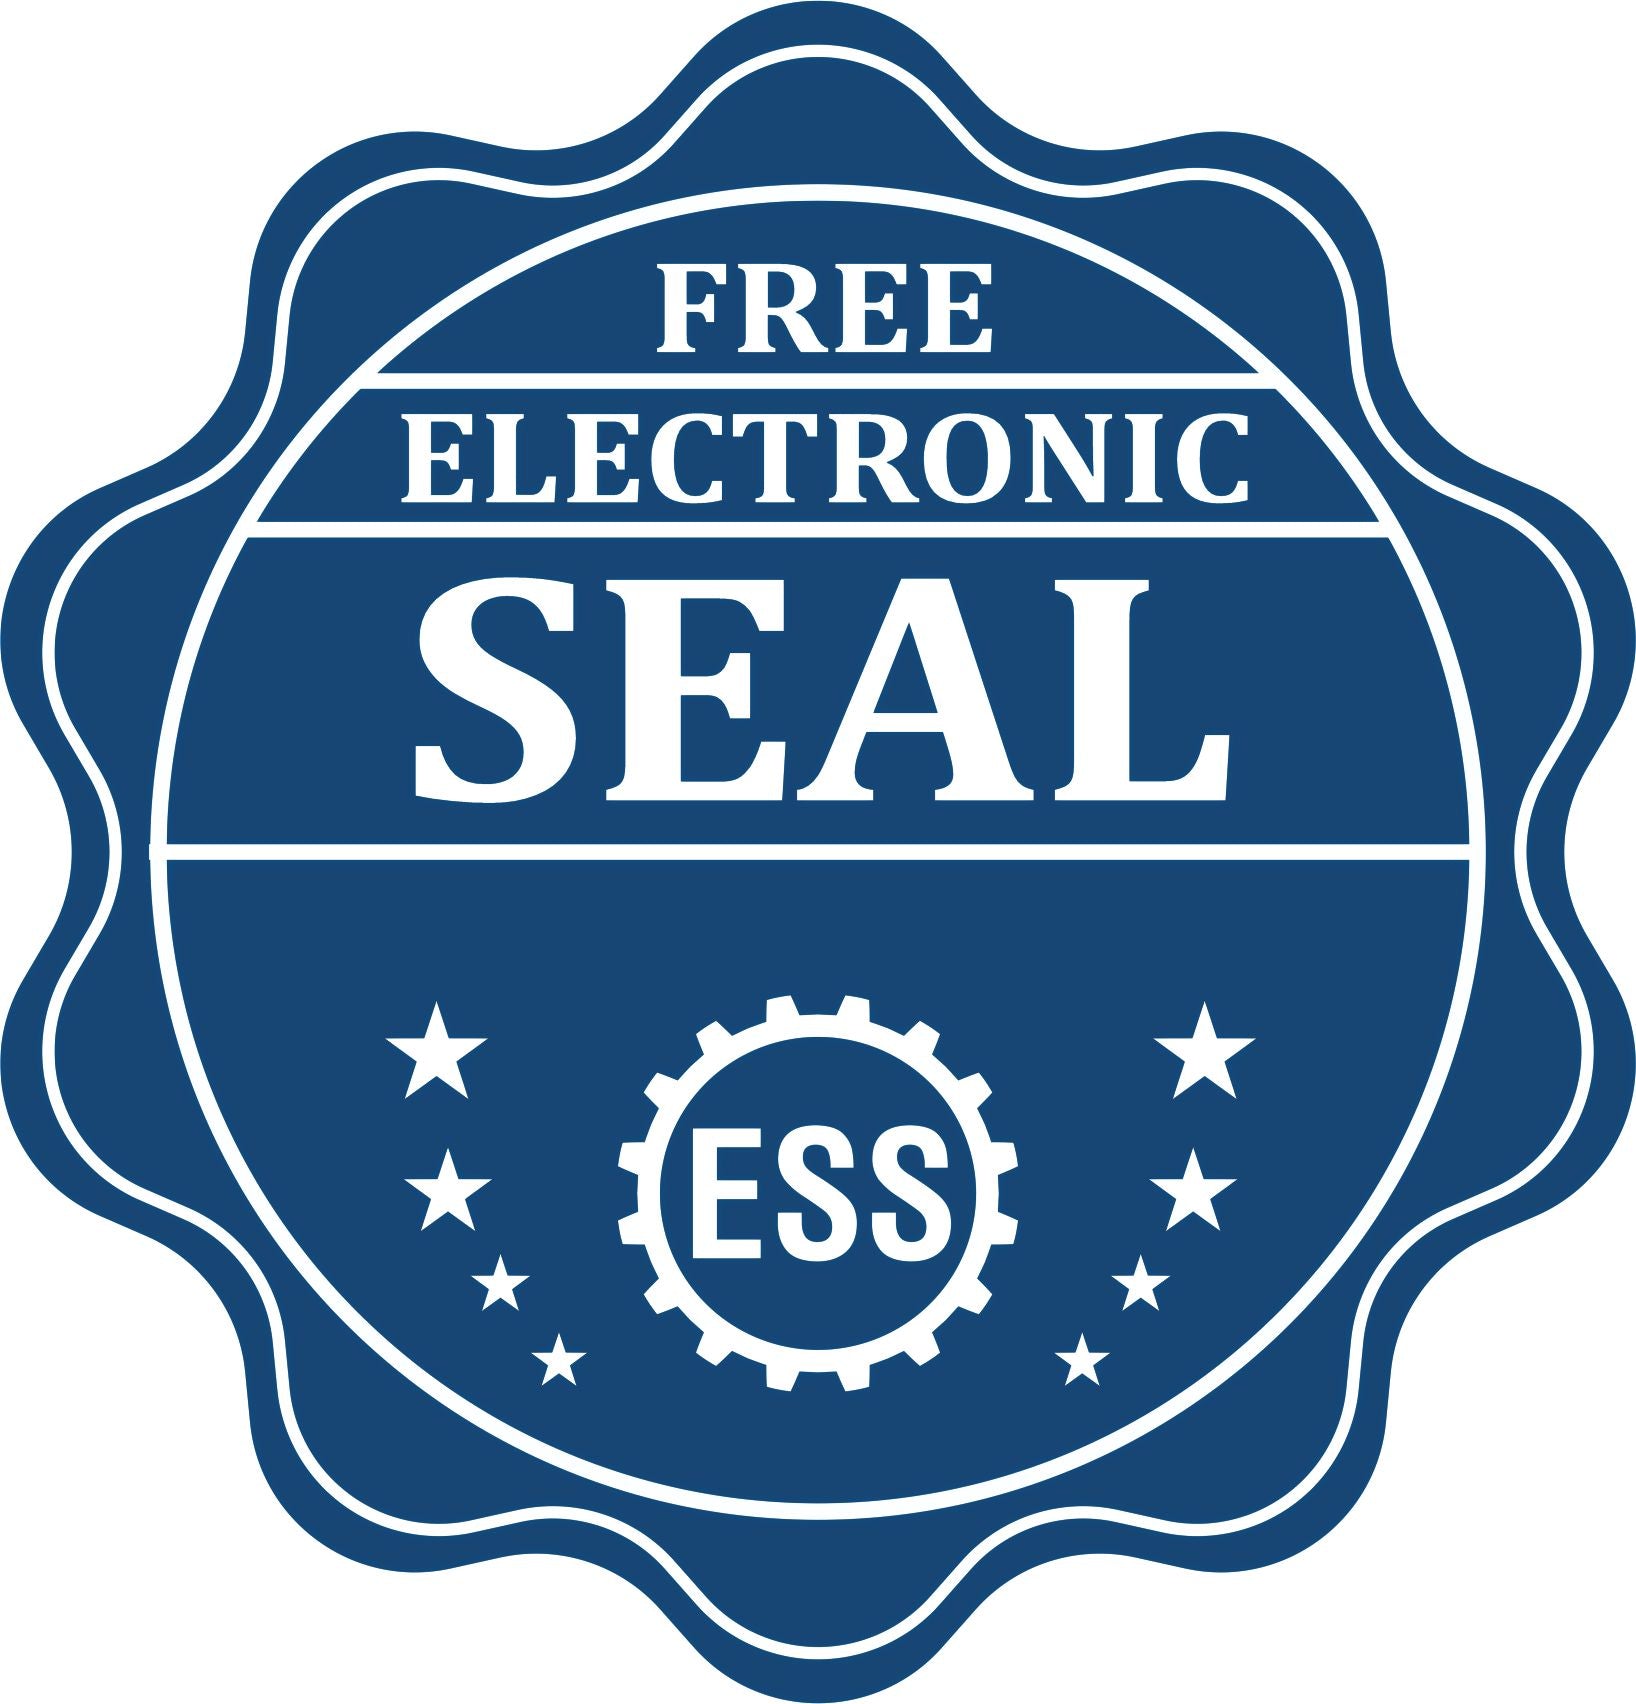 A badge showing a free electronic seal for the Heavy Duty Cast Iron Massachusetts Engineer Seal Embosser with stars and the ESS gear on the emblem.